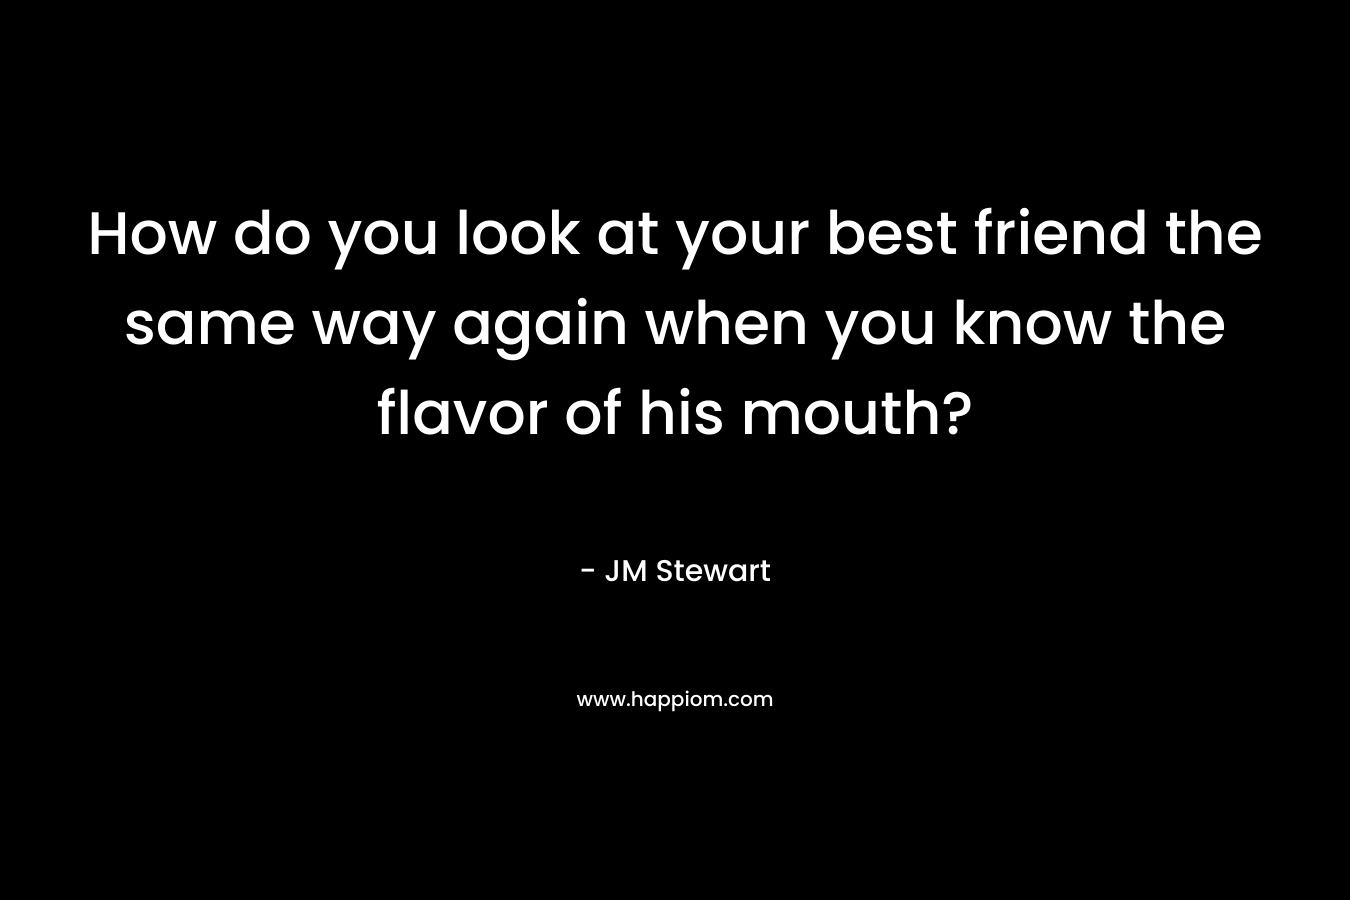 How do you look at your best friend the same way again when you know the flavor of his mouth? – JM Stewart